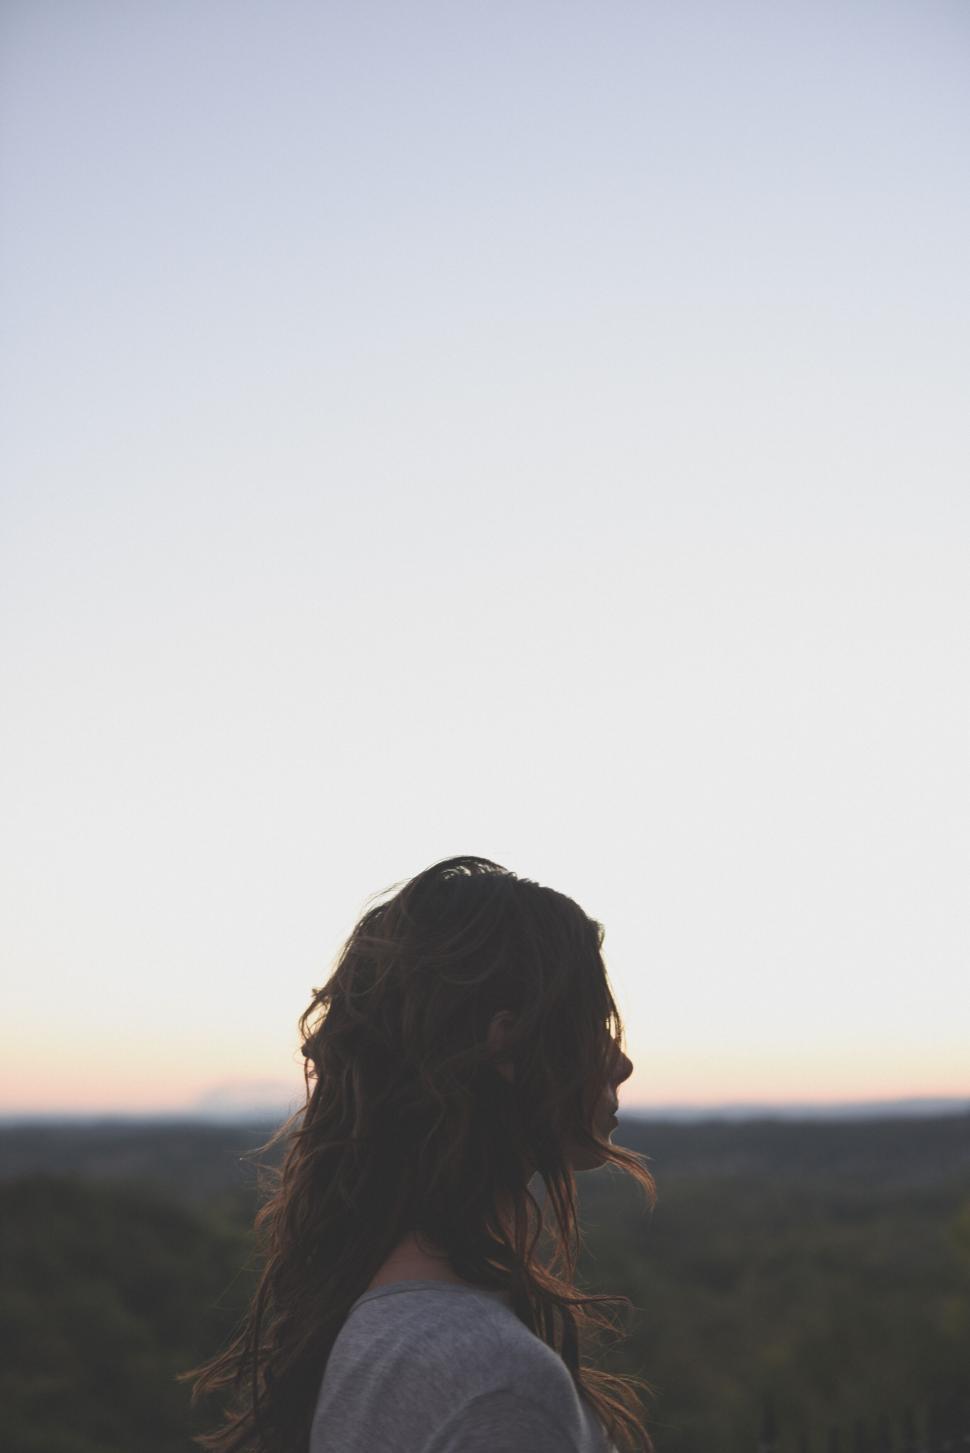 Free Image of Woman with long hair watching sunset obscured 